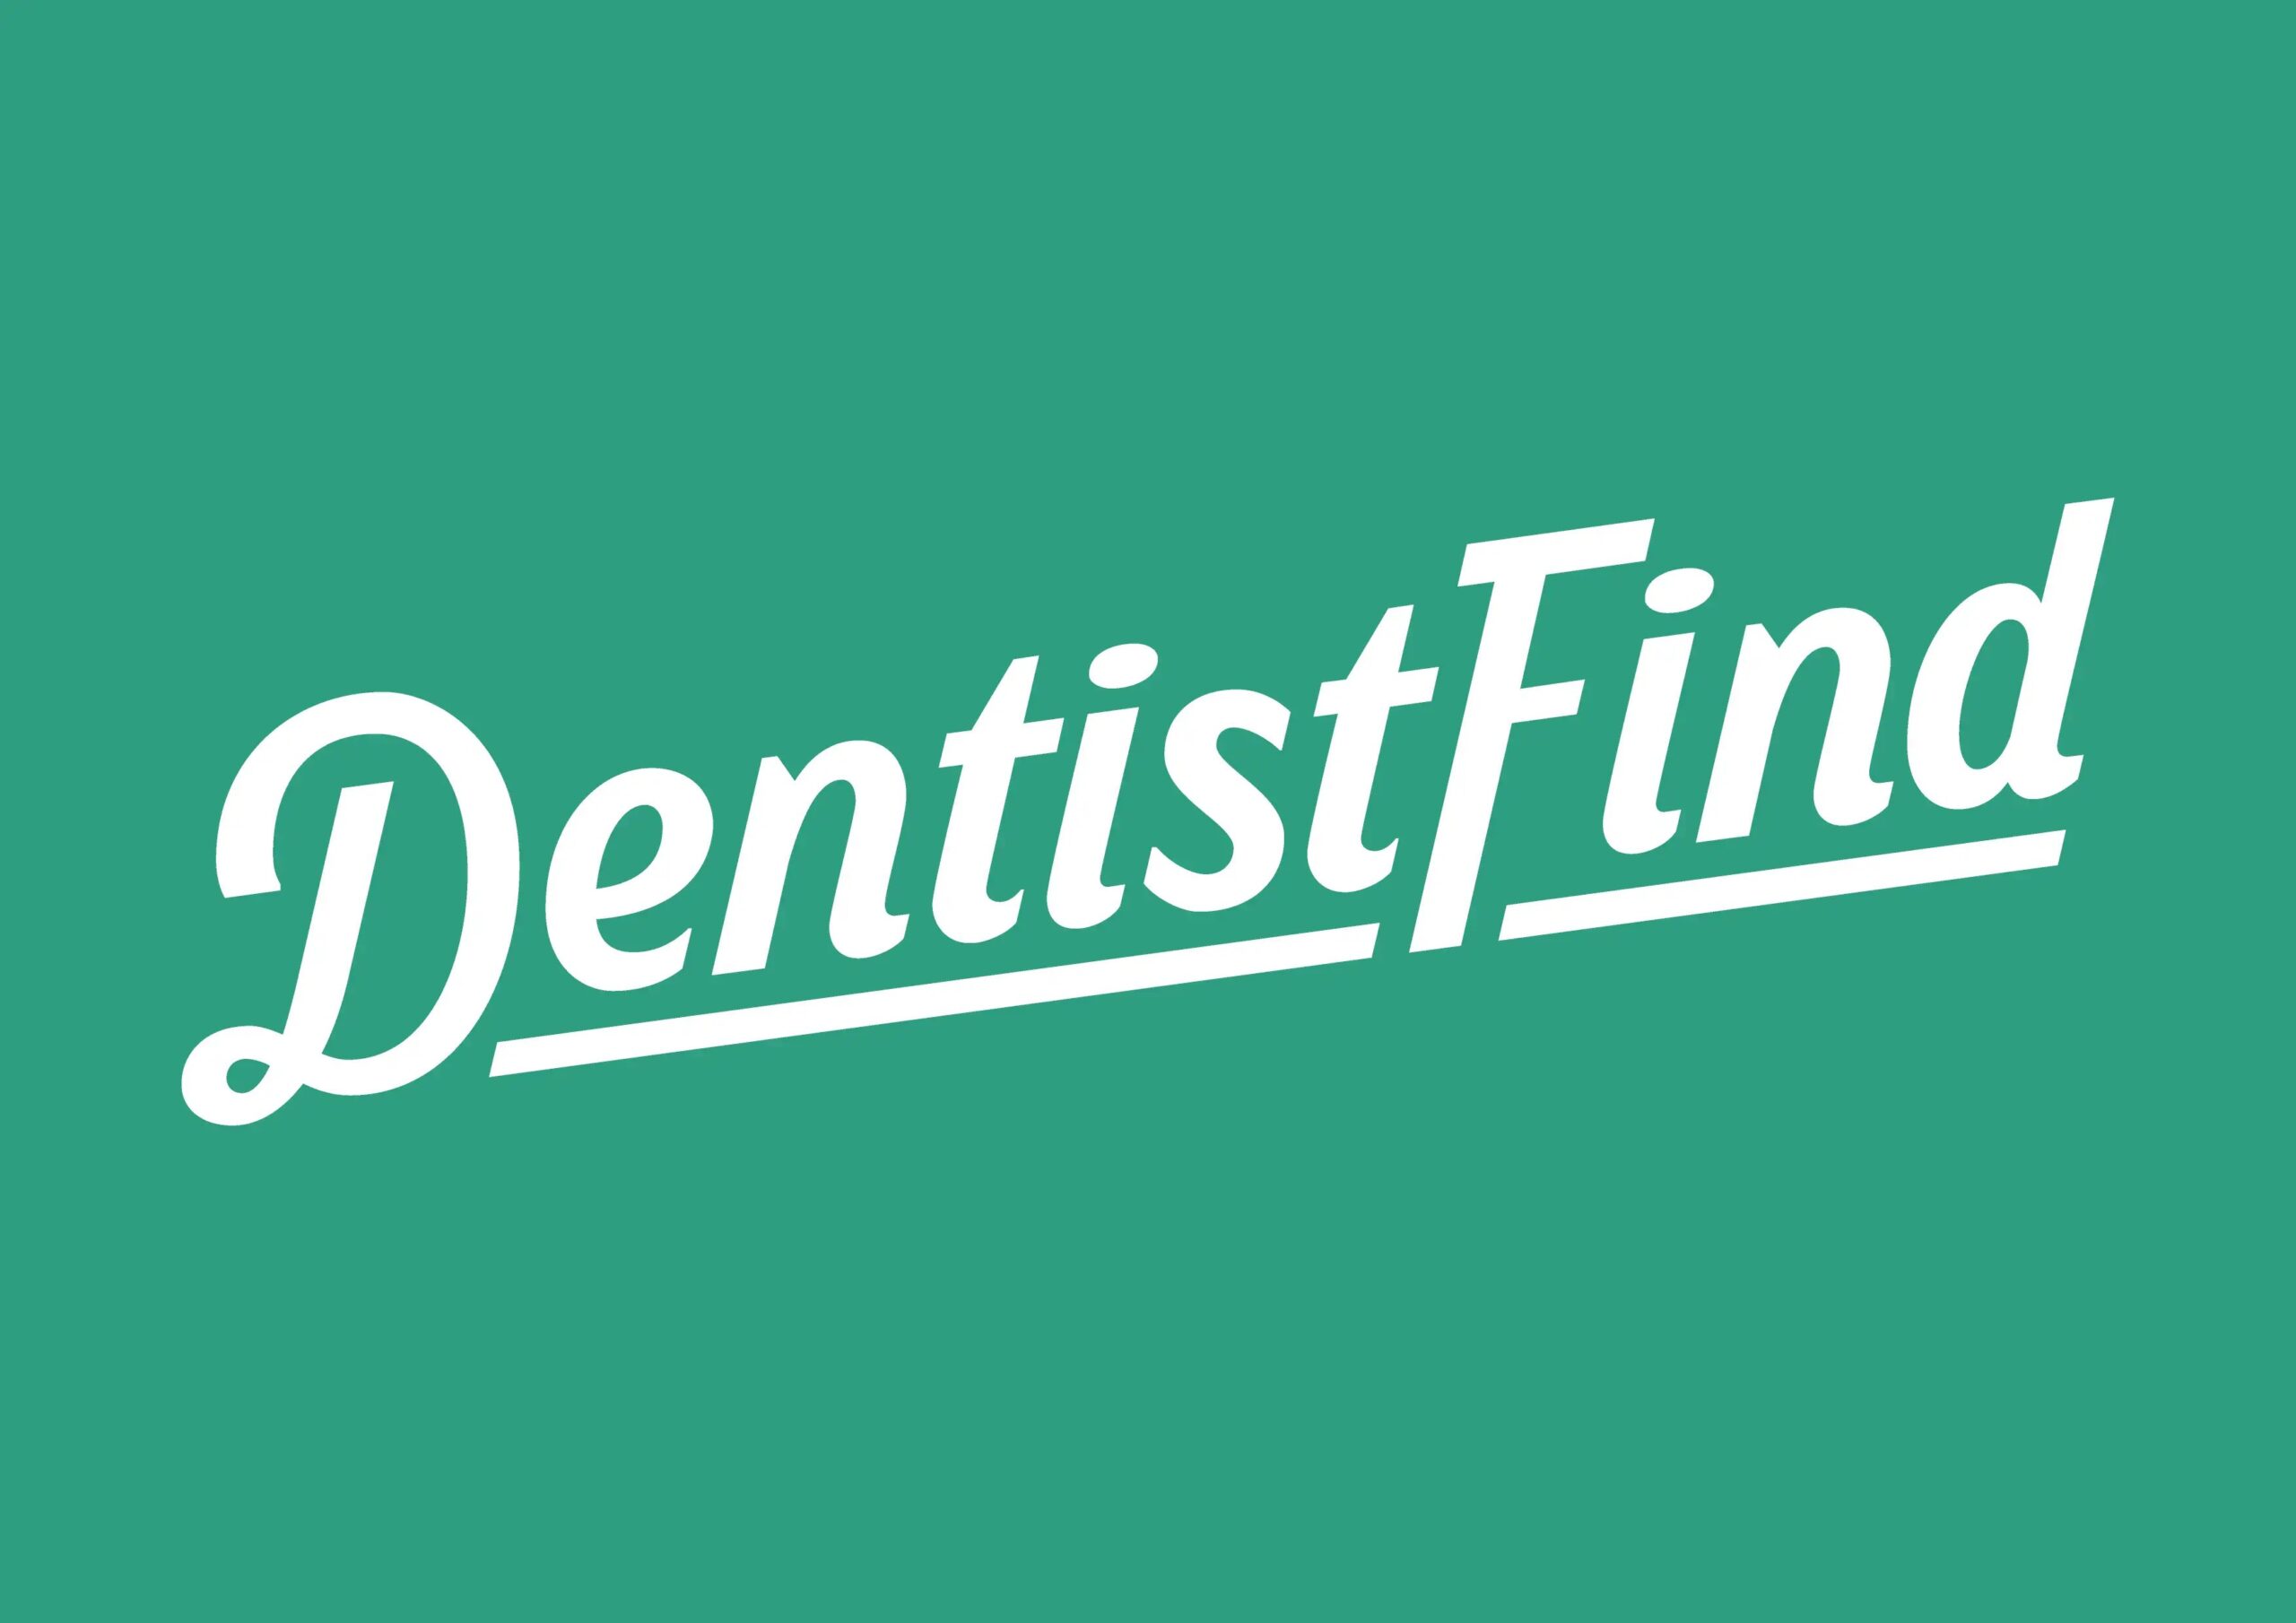 Virtual Administrative Assistant Needed at DentistFind